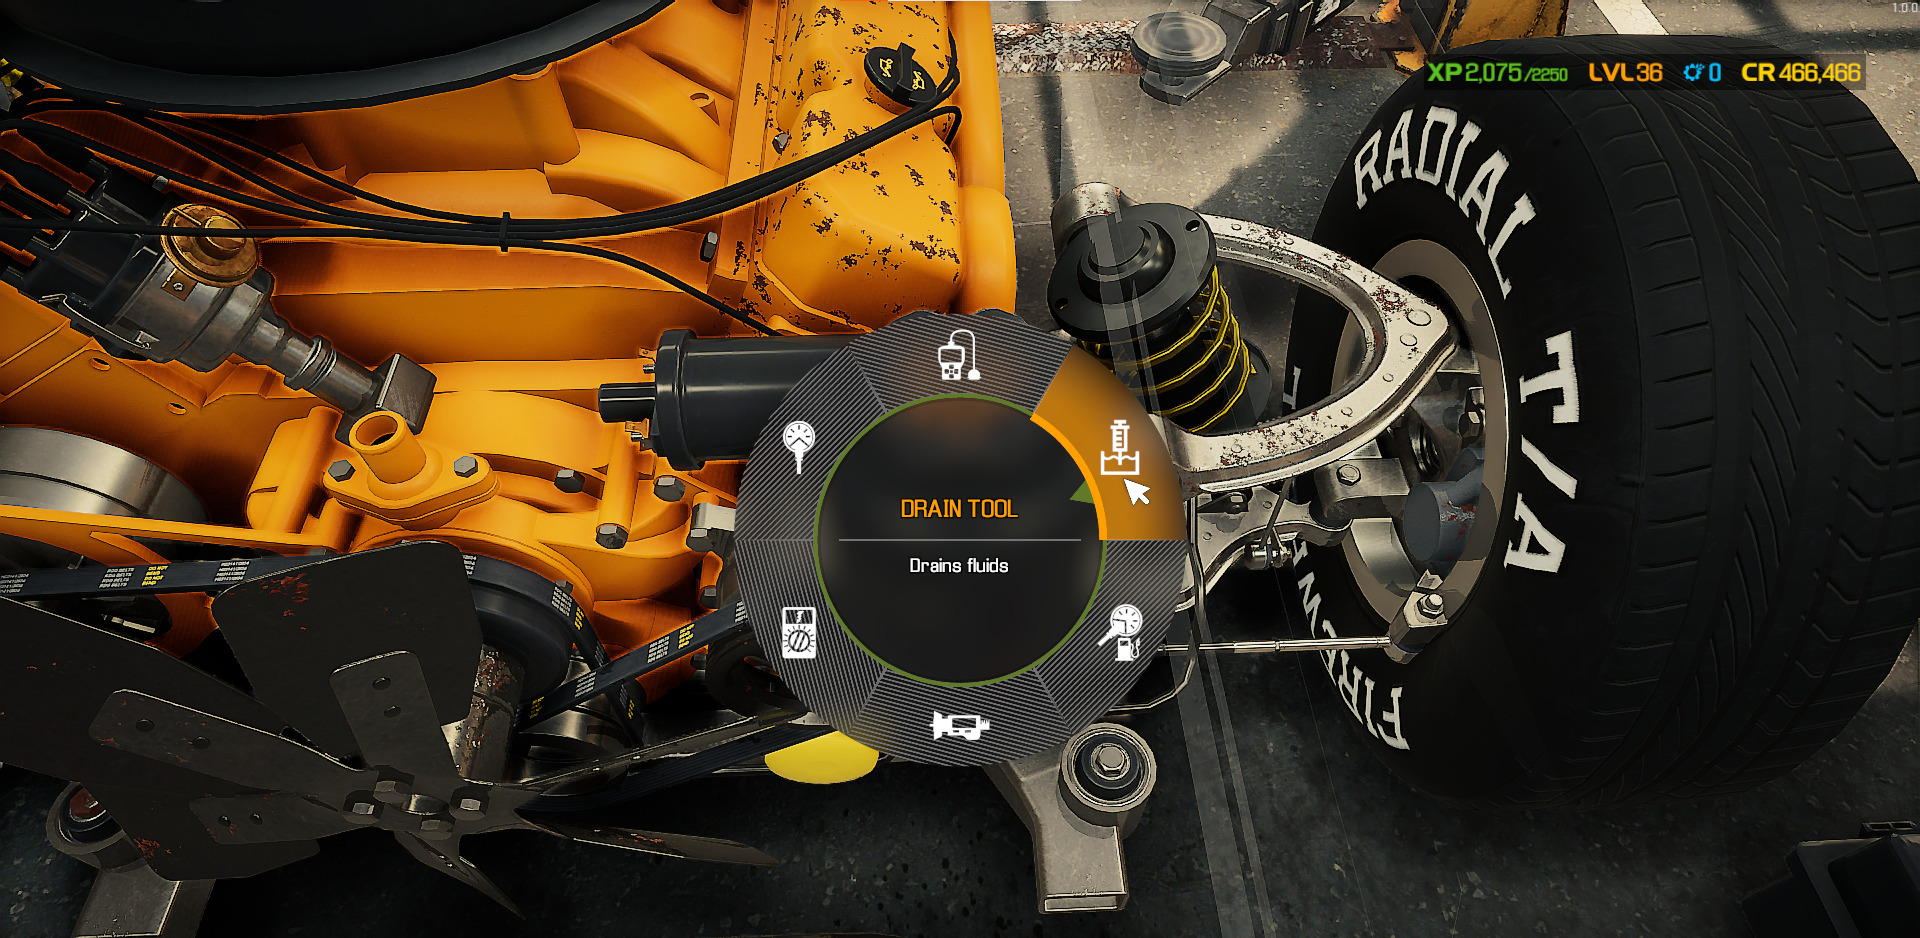 A screenshot showing the Drain Tool command on the Pie Wheel in Car Mechanic Simulator